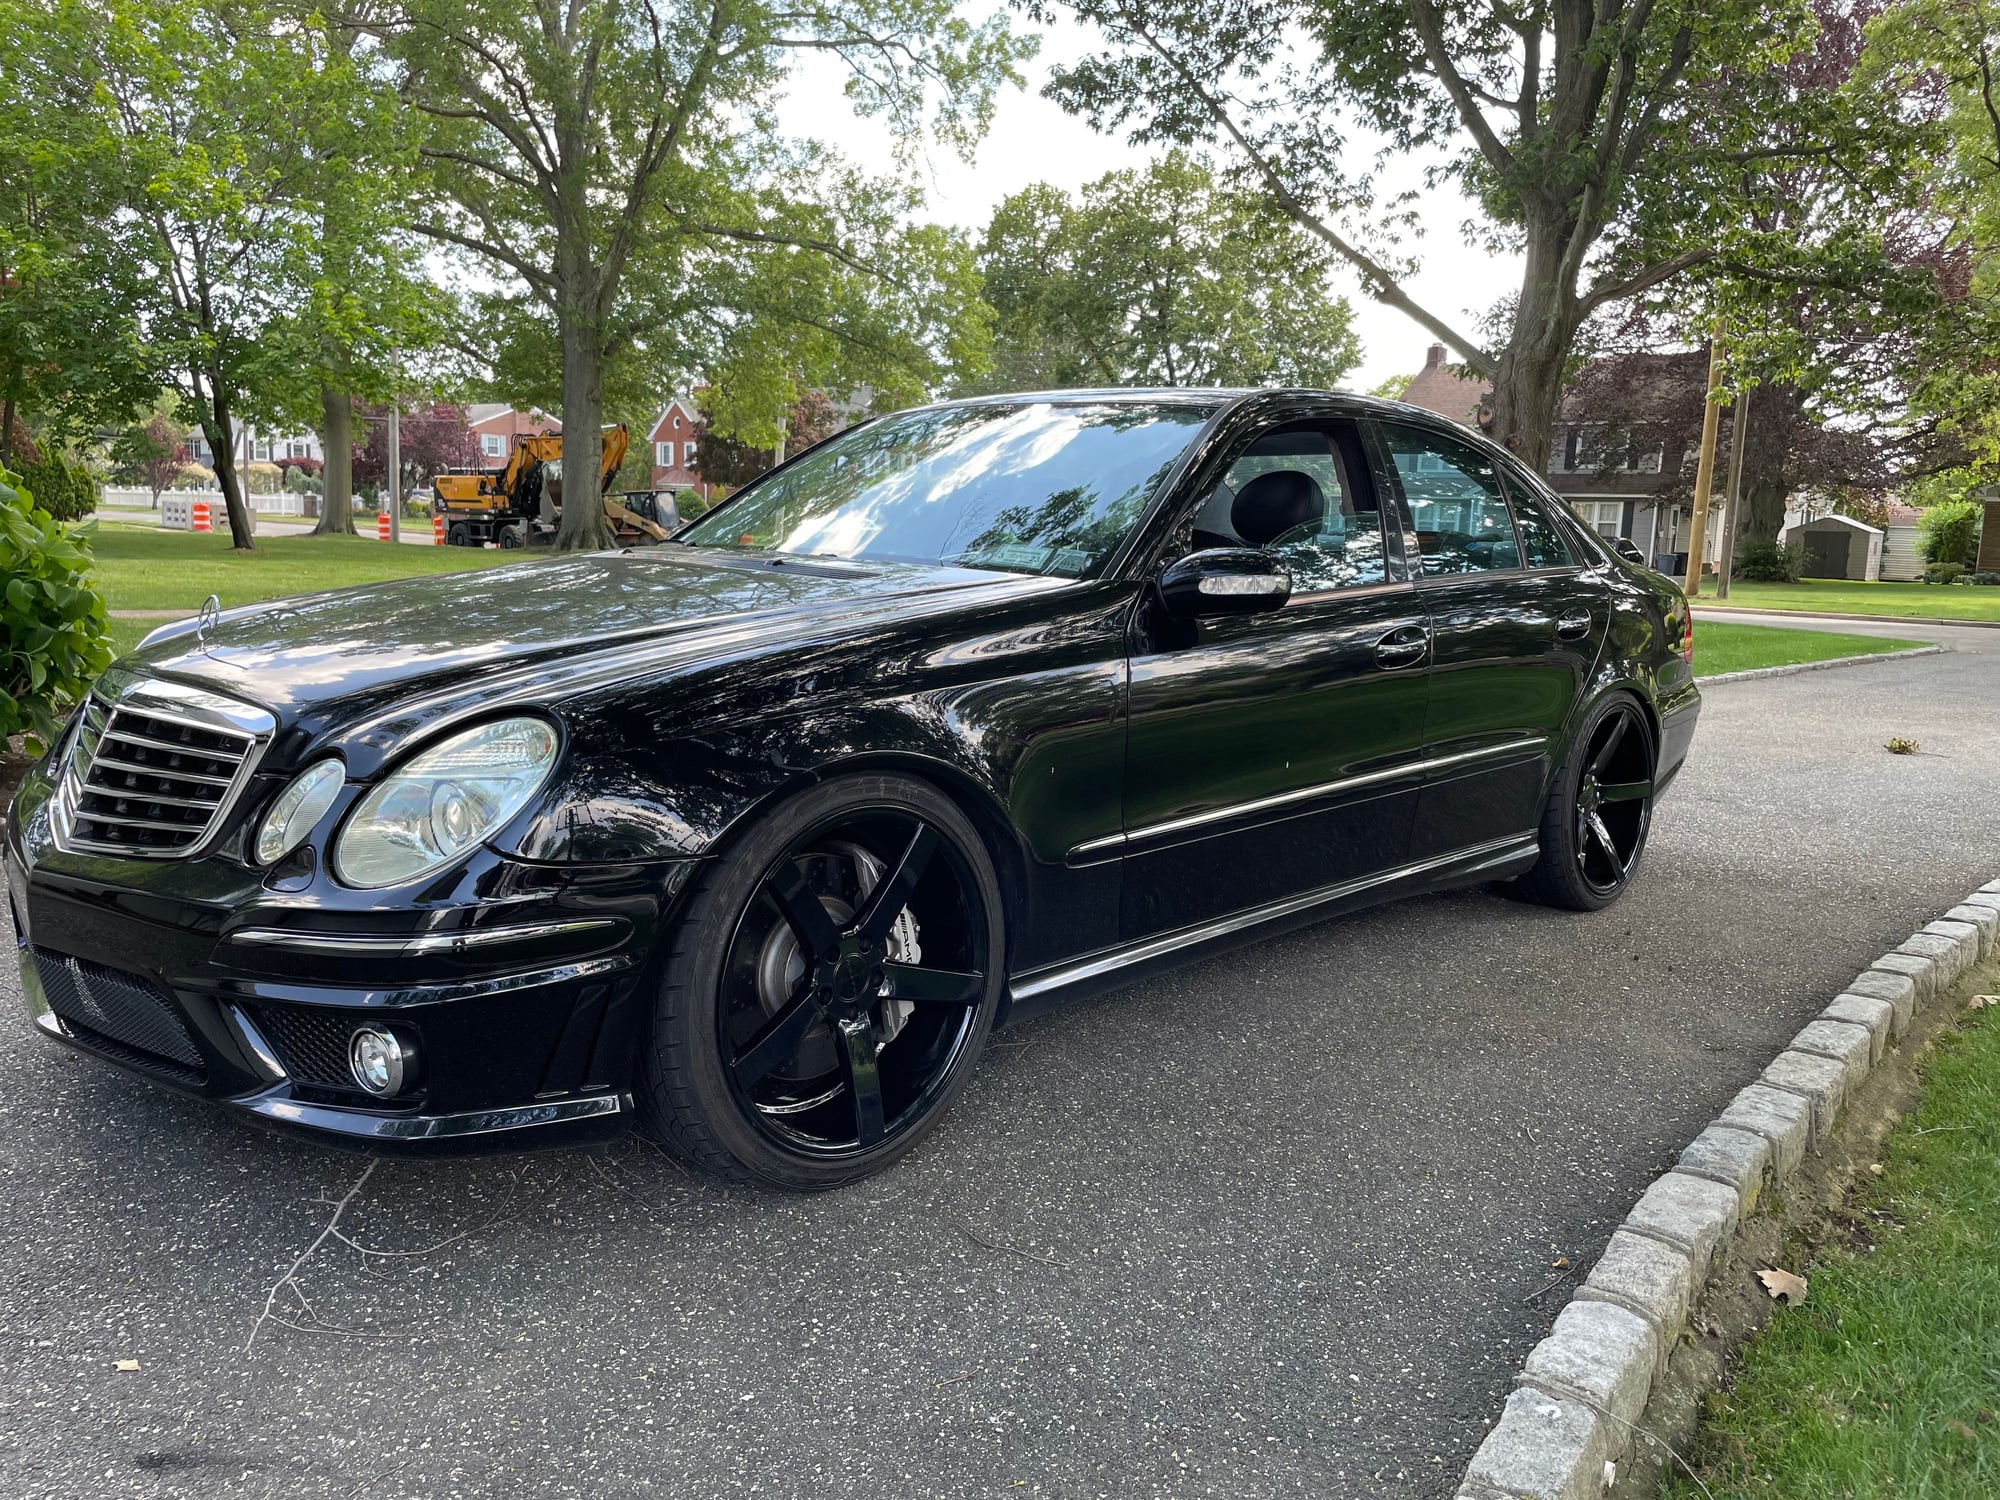 Wheels and Tires/Axles - Vossen CV3R 20" Wheels - Black E55 - Used - 2003 to 2006 Mercedes-Benz E55 AMG - Franklin Square, NY 11010, United States